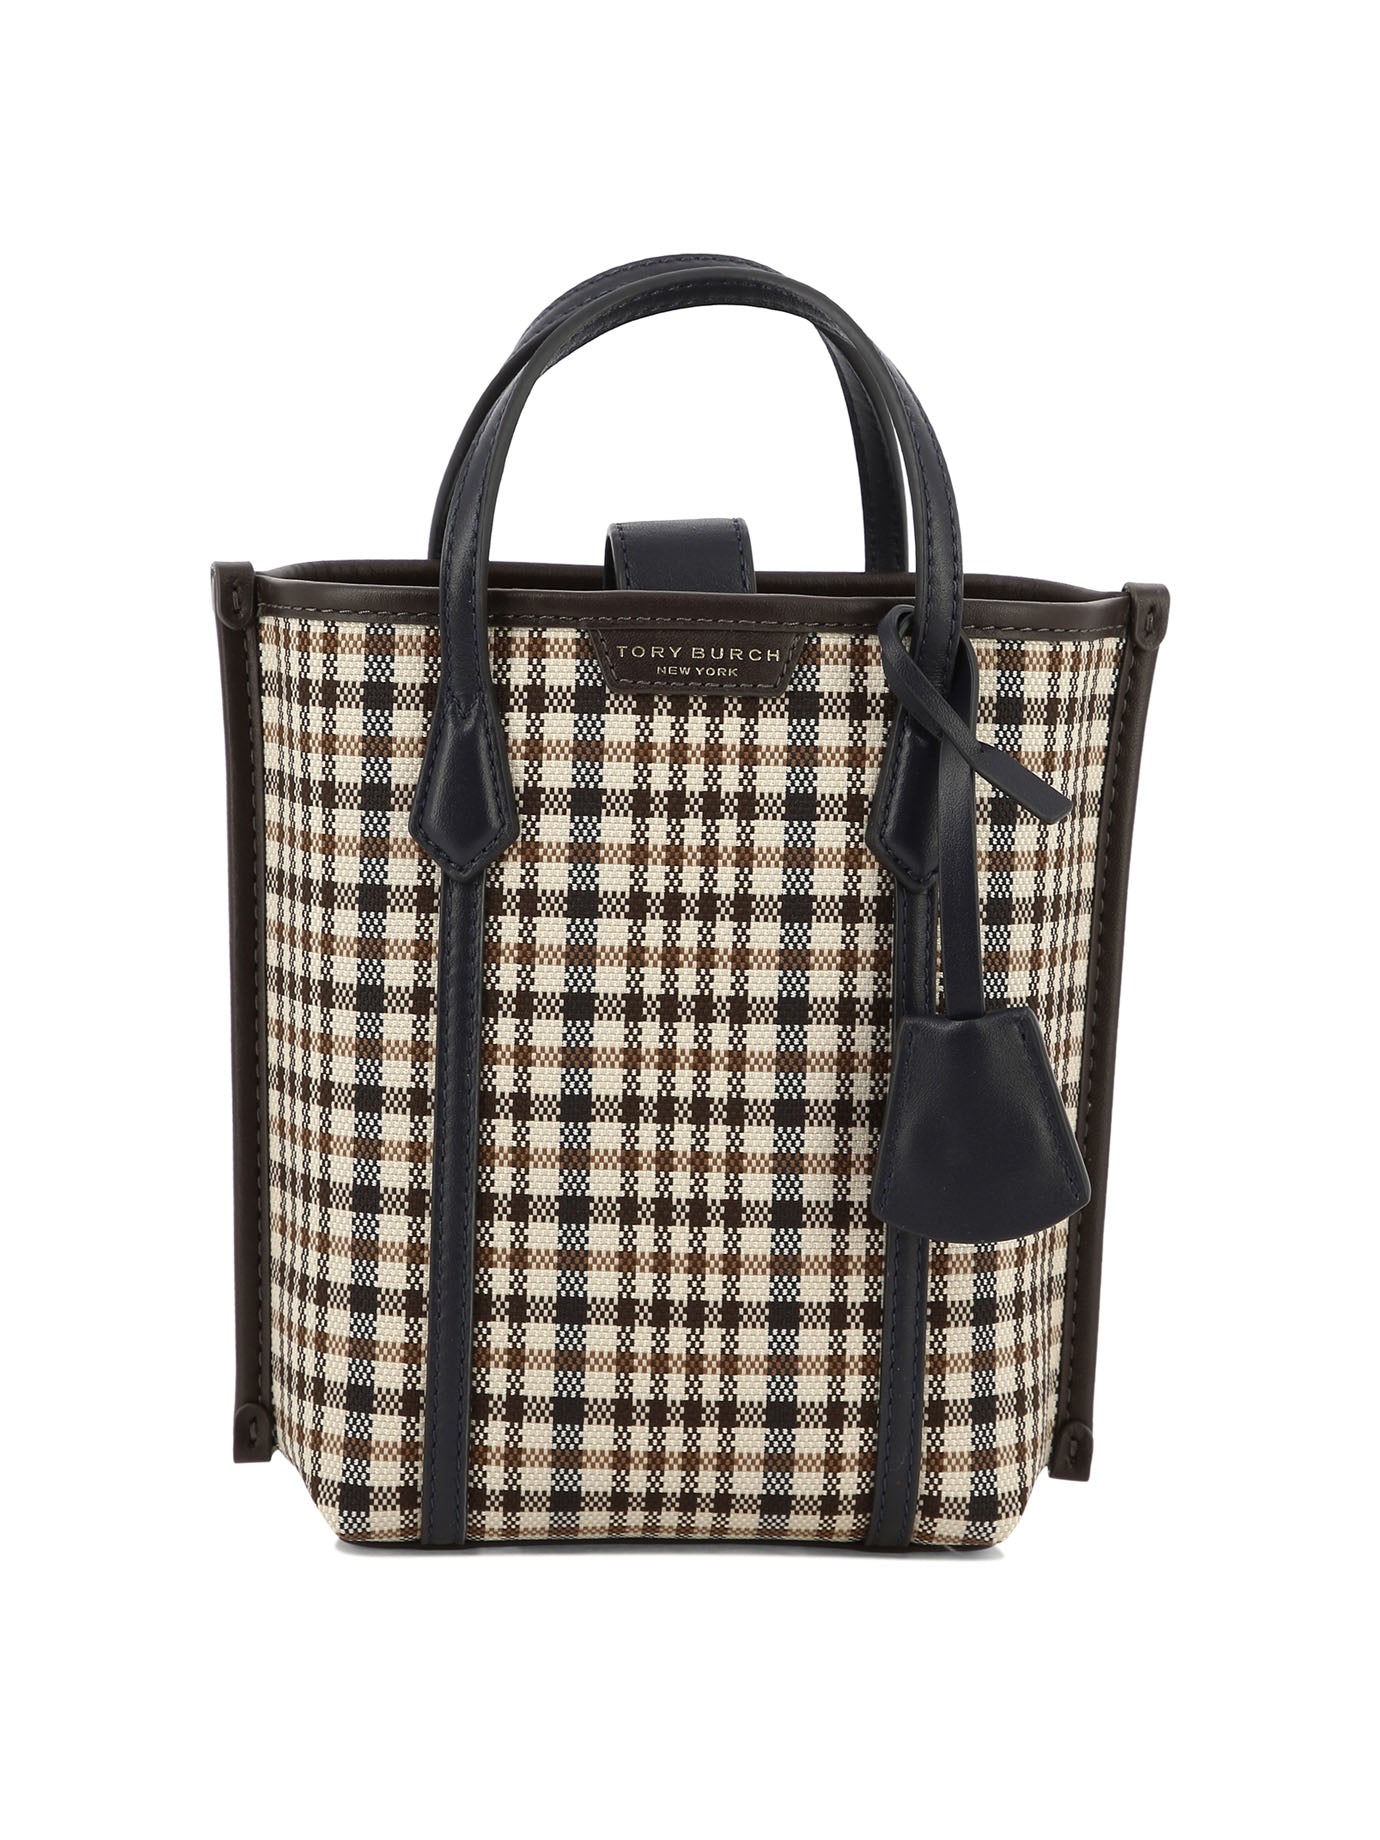 Tory Burch Leather Perry Tote Bag | Harrods GR